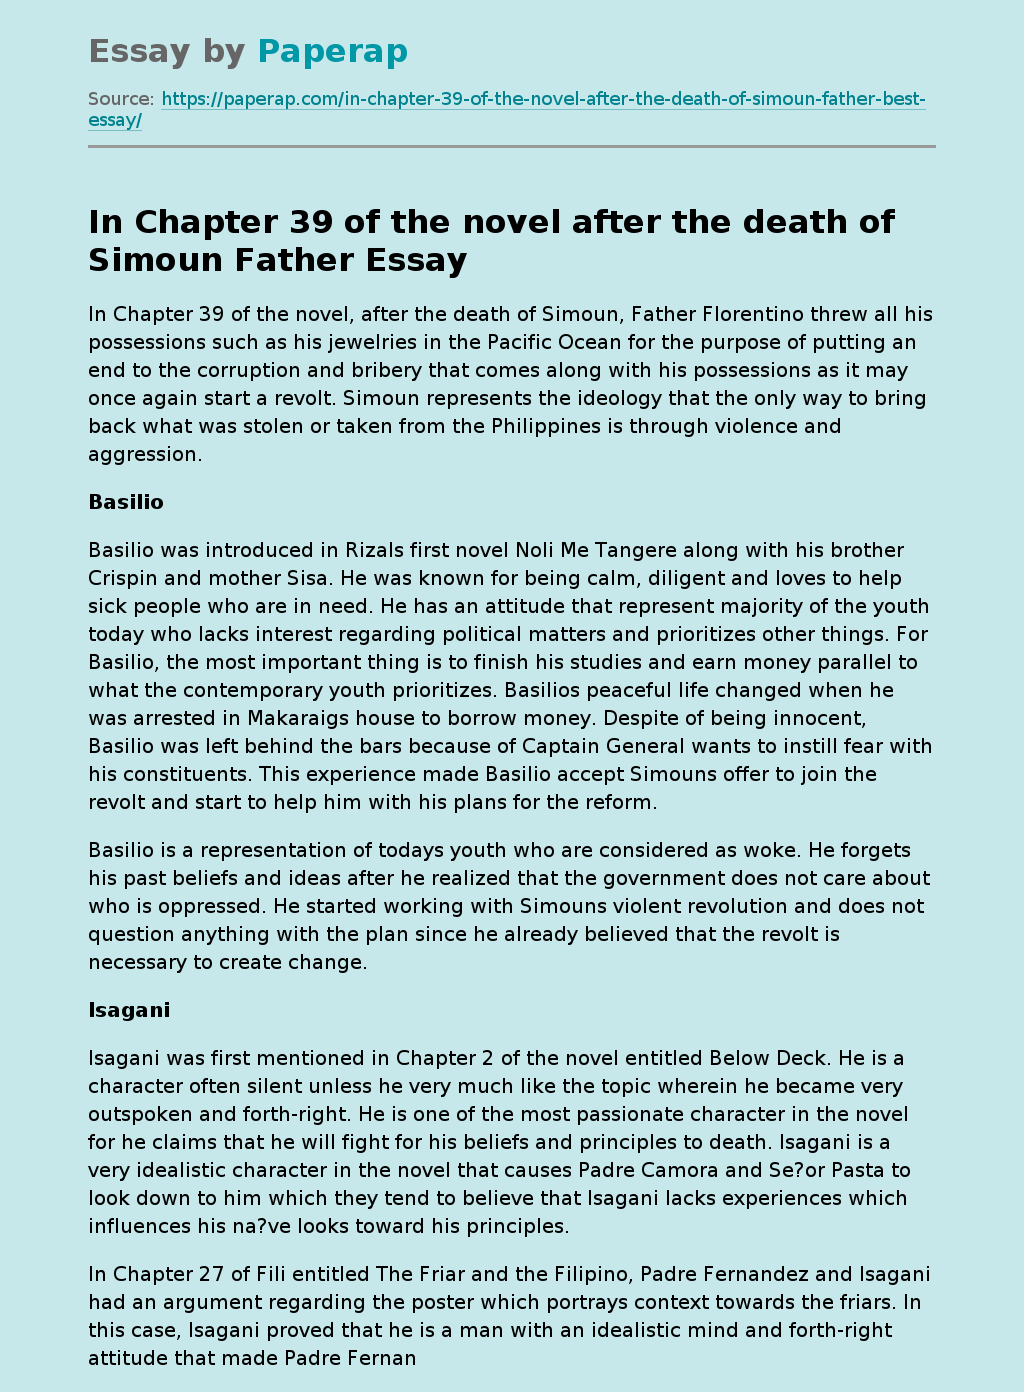 In Chapter 39 of the novel after the death of Simoun Father